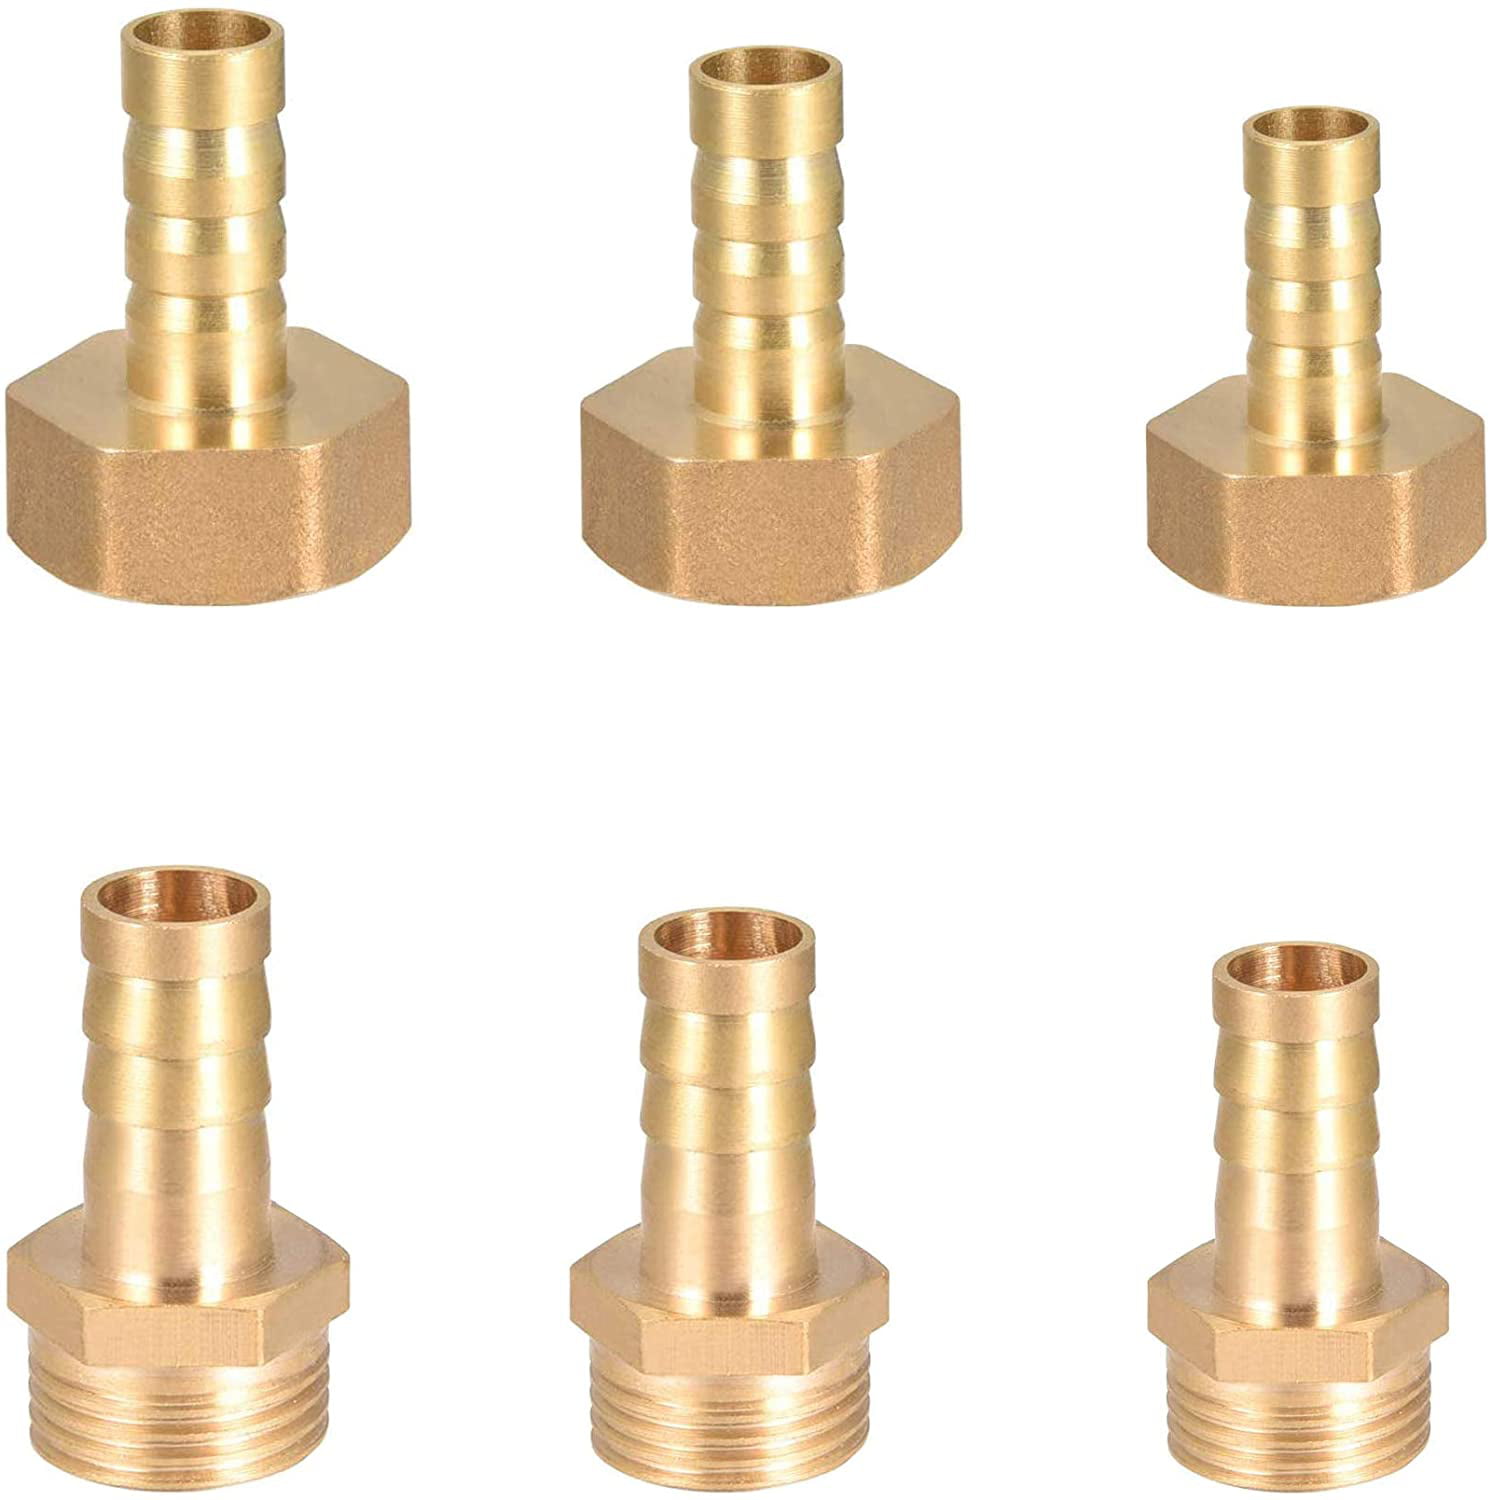 1/2" BSP Female Thread Straight Brass Connector Fitting 10mm Hose Barb Tail 